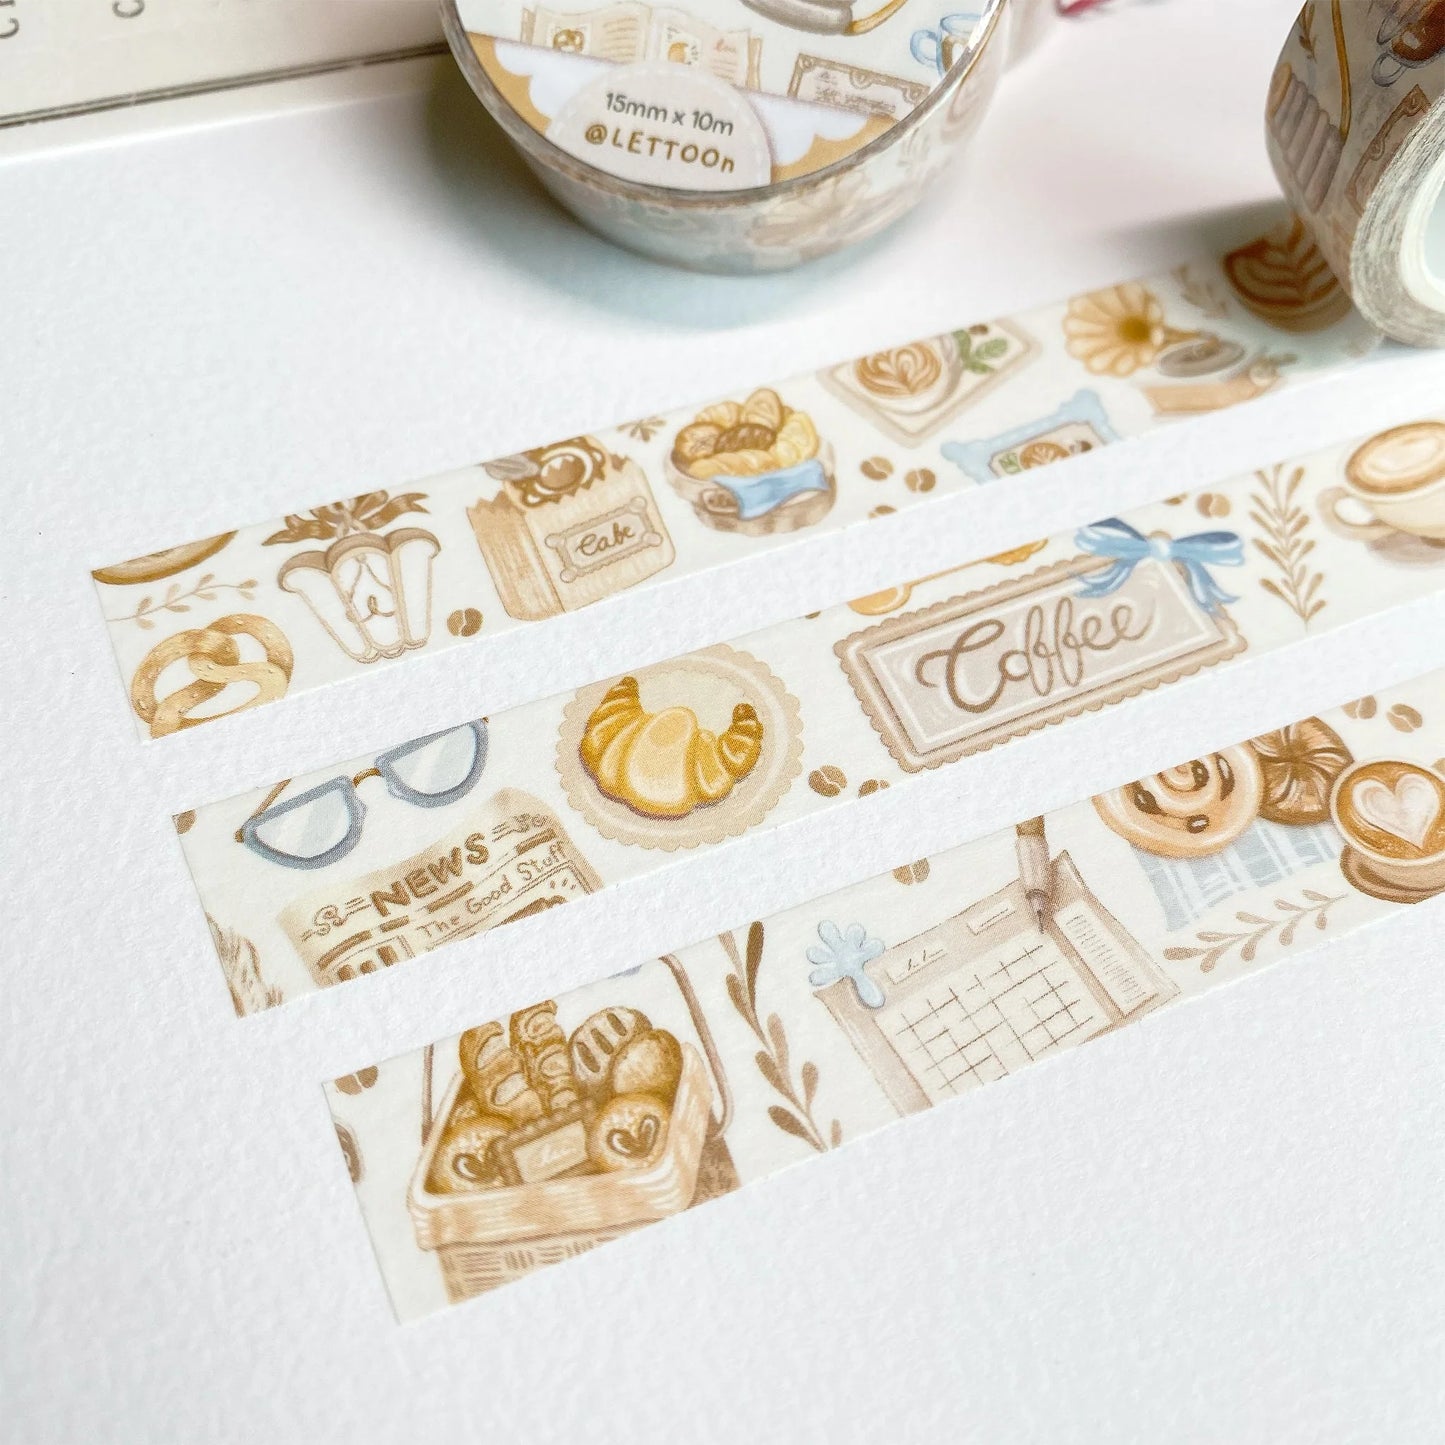 Washi tape Cozy Cafe - LETTOOn